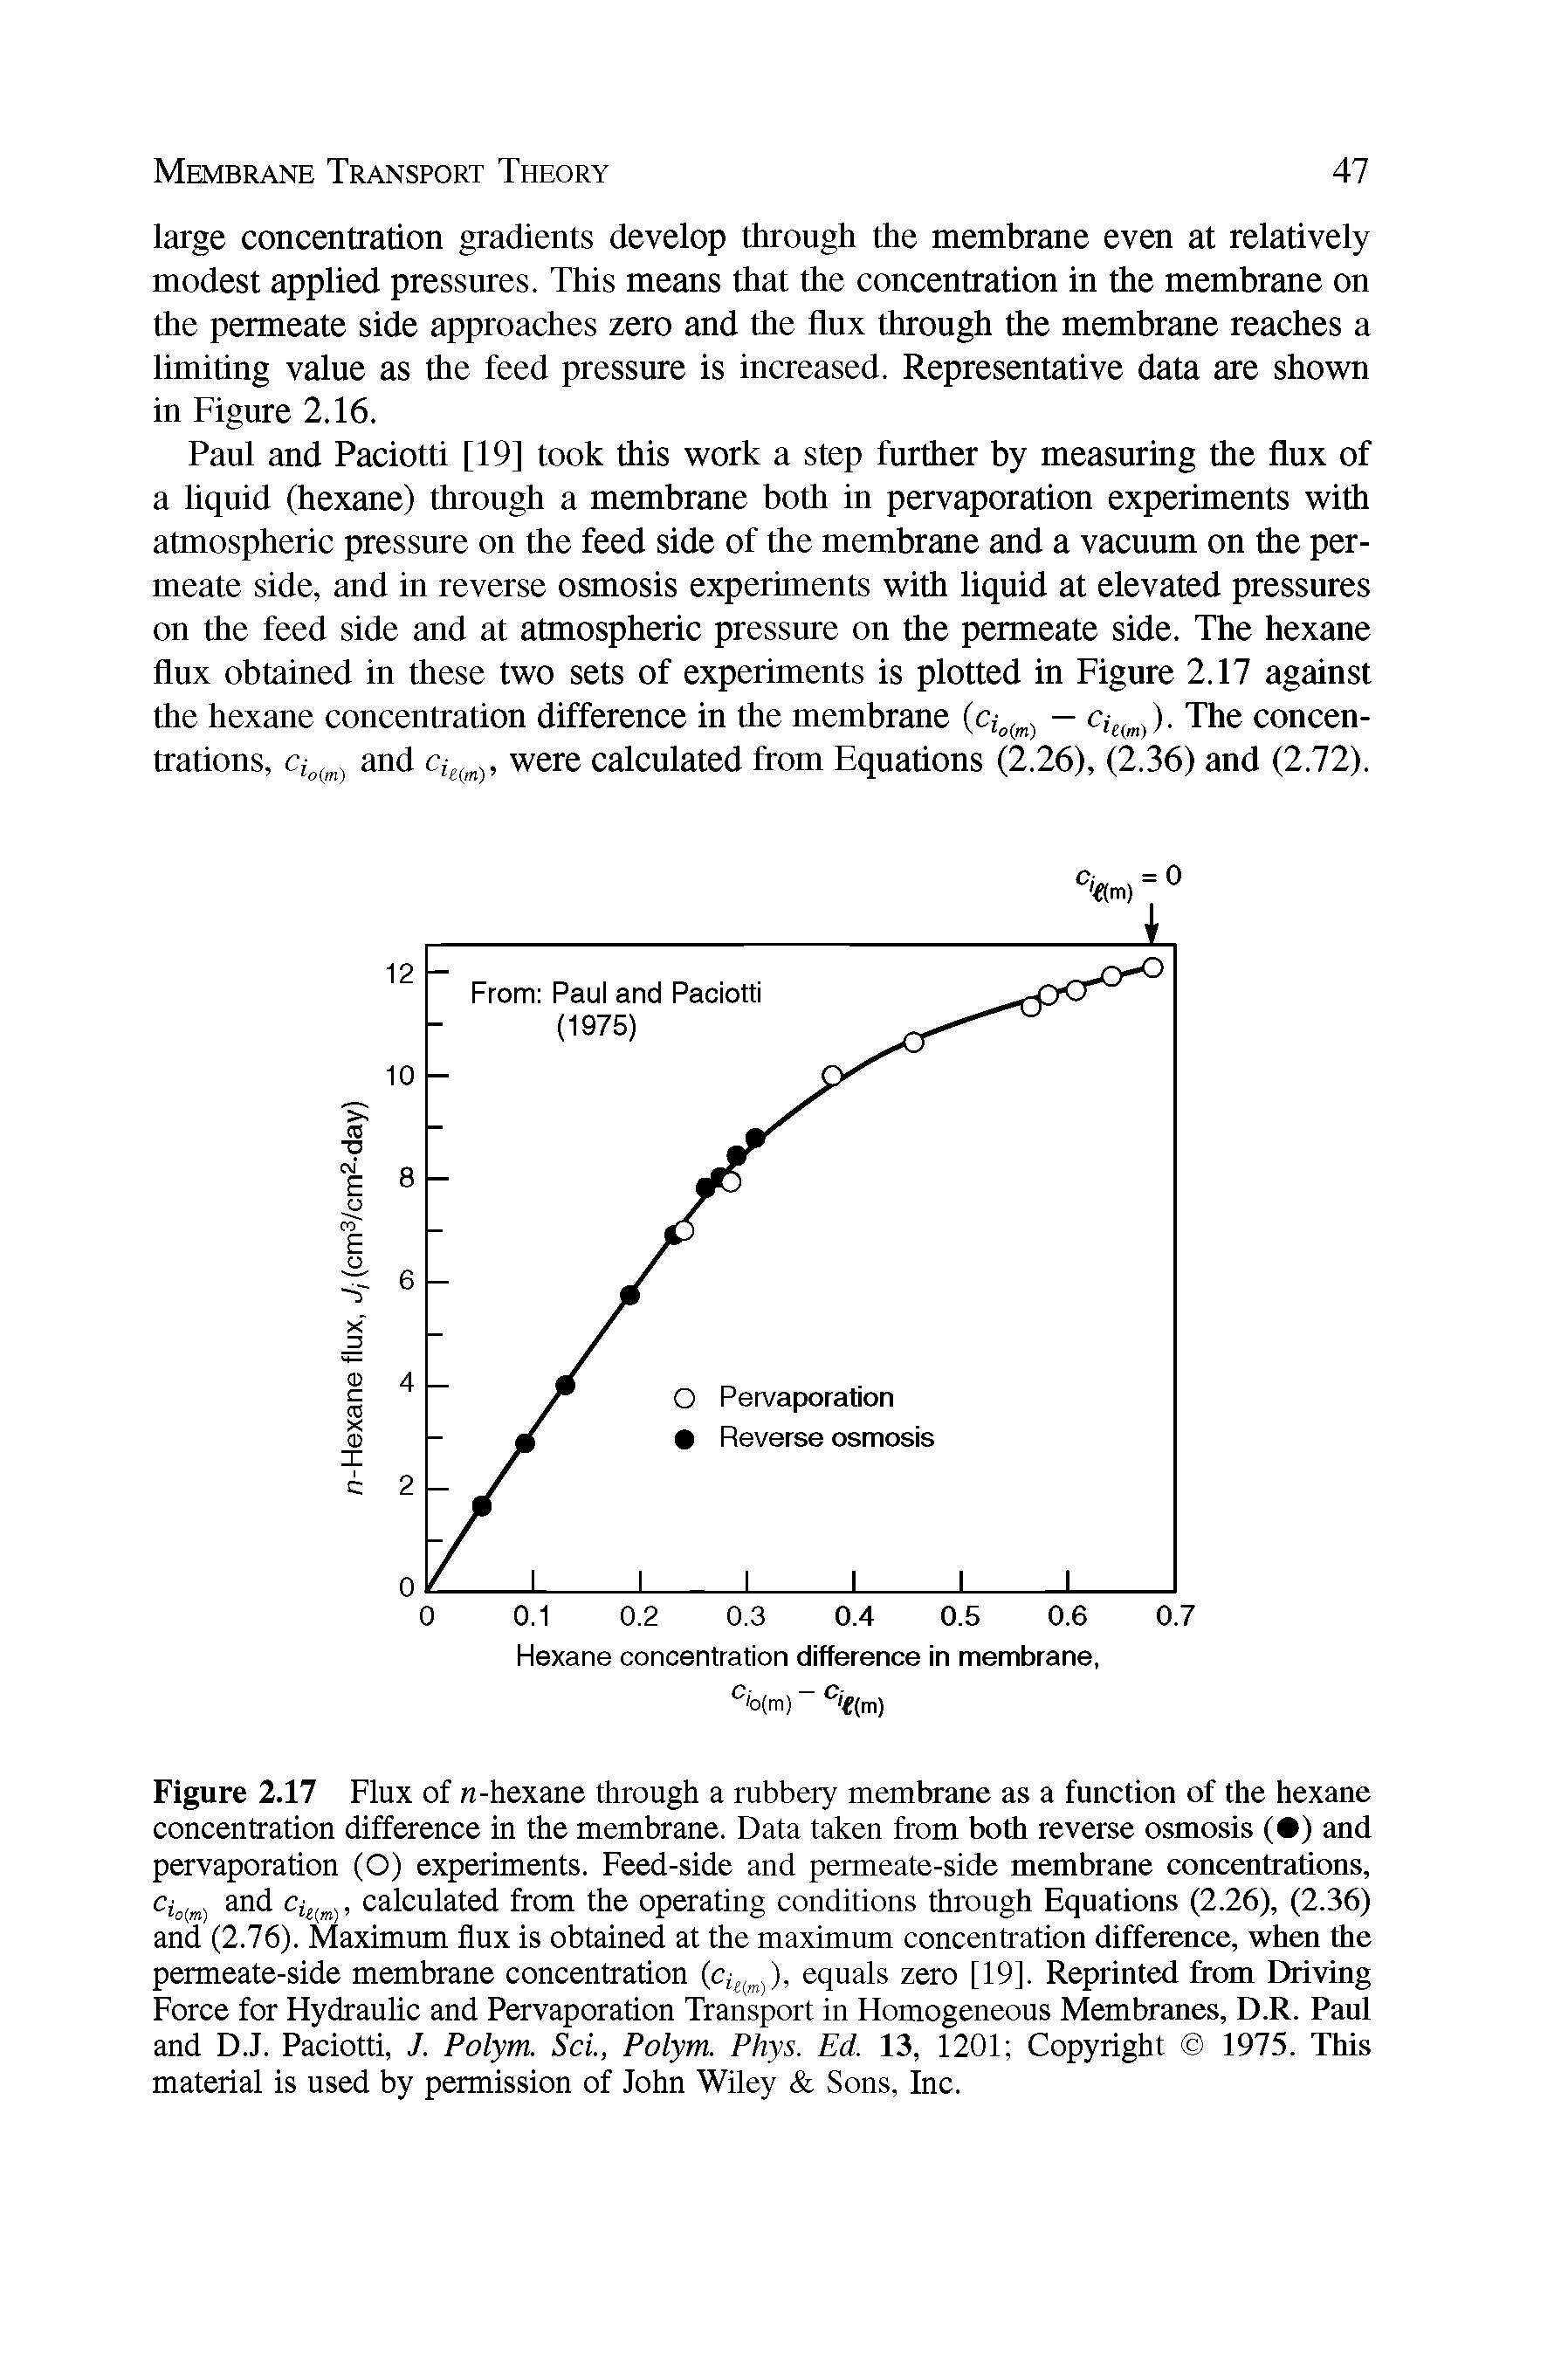 Figure 2.17 Flux of n-hexane through a rubbery membrane as a function of the hexane concentration difference in the membrane. Data taken from both reverse osmosis ( ) and pervaporation (O) experiments. Feed-side and permeate-side membrane concentrations, Ci0 m) and Cie m), calculated from the operating conditions through Equations (2.26), (2.36) and (2.76). Maximum flux is obtained at the maximum concentration difference, when the permeate-side membrane concentration cit(m)), equals zero [19]. Reprinted from Driving Force for Hydraulic and Pervaporation Transport in Homogeneous Membranes, D.R. Paul and D.J. Paciotti, J. Polym. Sci., Polym. Phys. Ed. 13, 1201 Copyright 1975. This material is used by permission of John Wiley Sons, Inc.